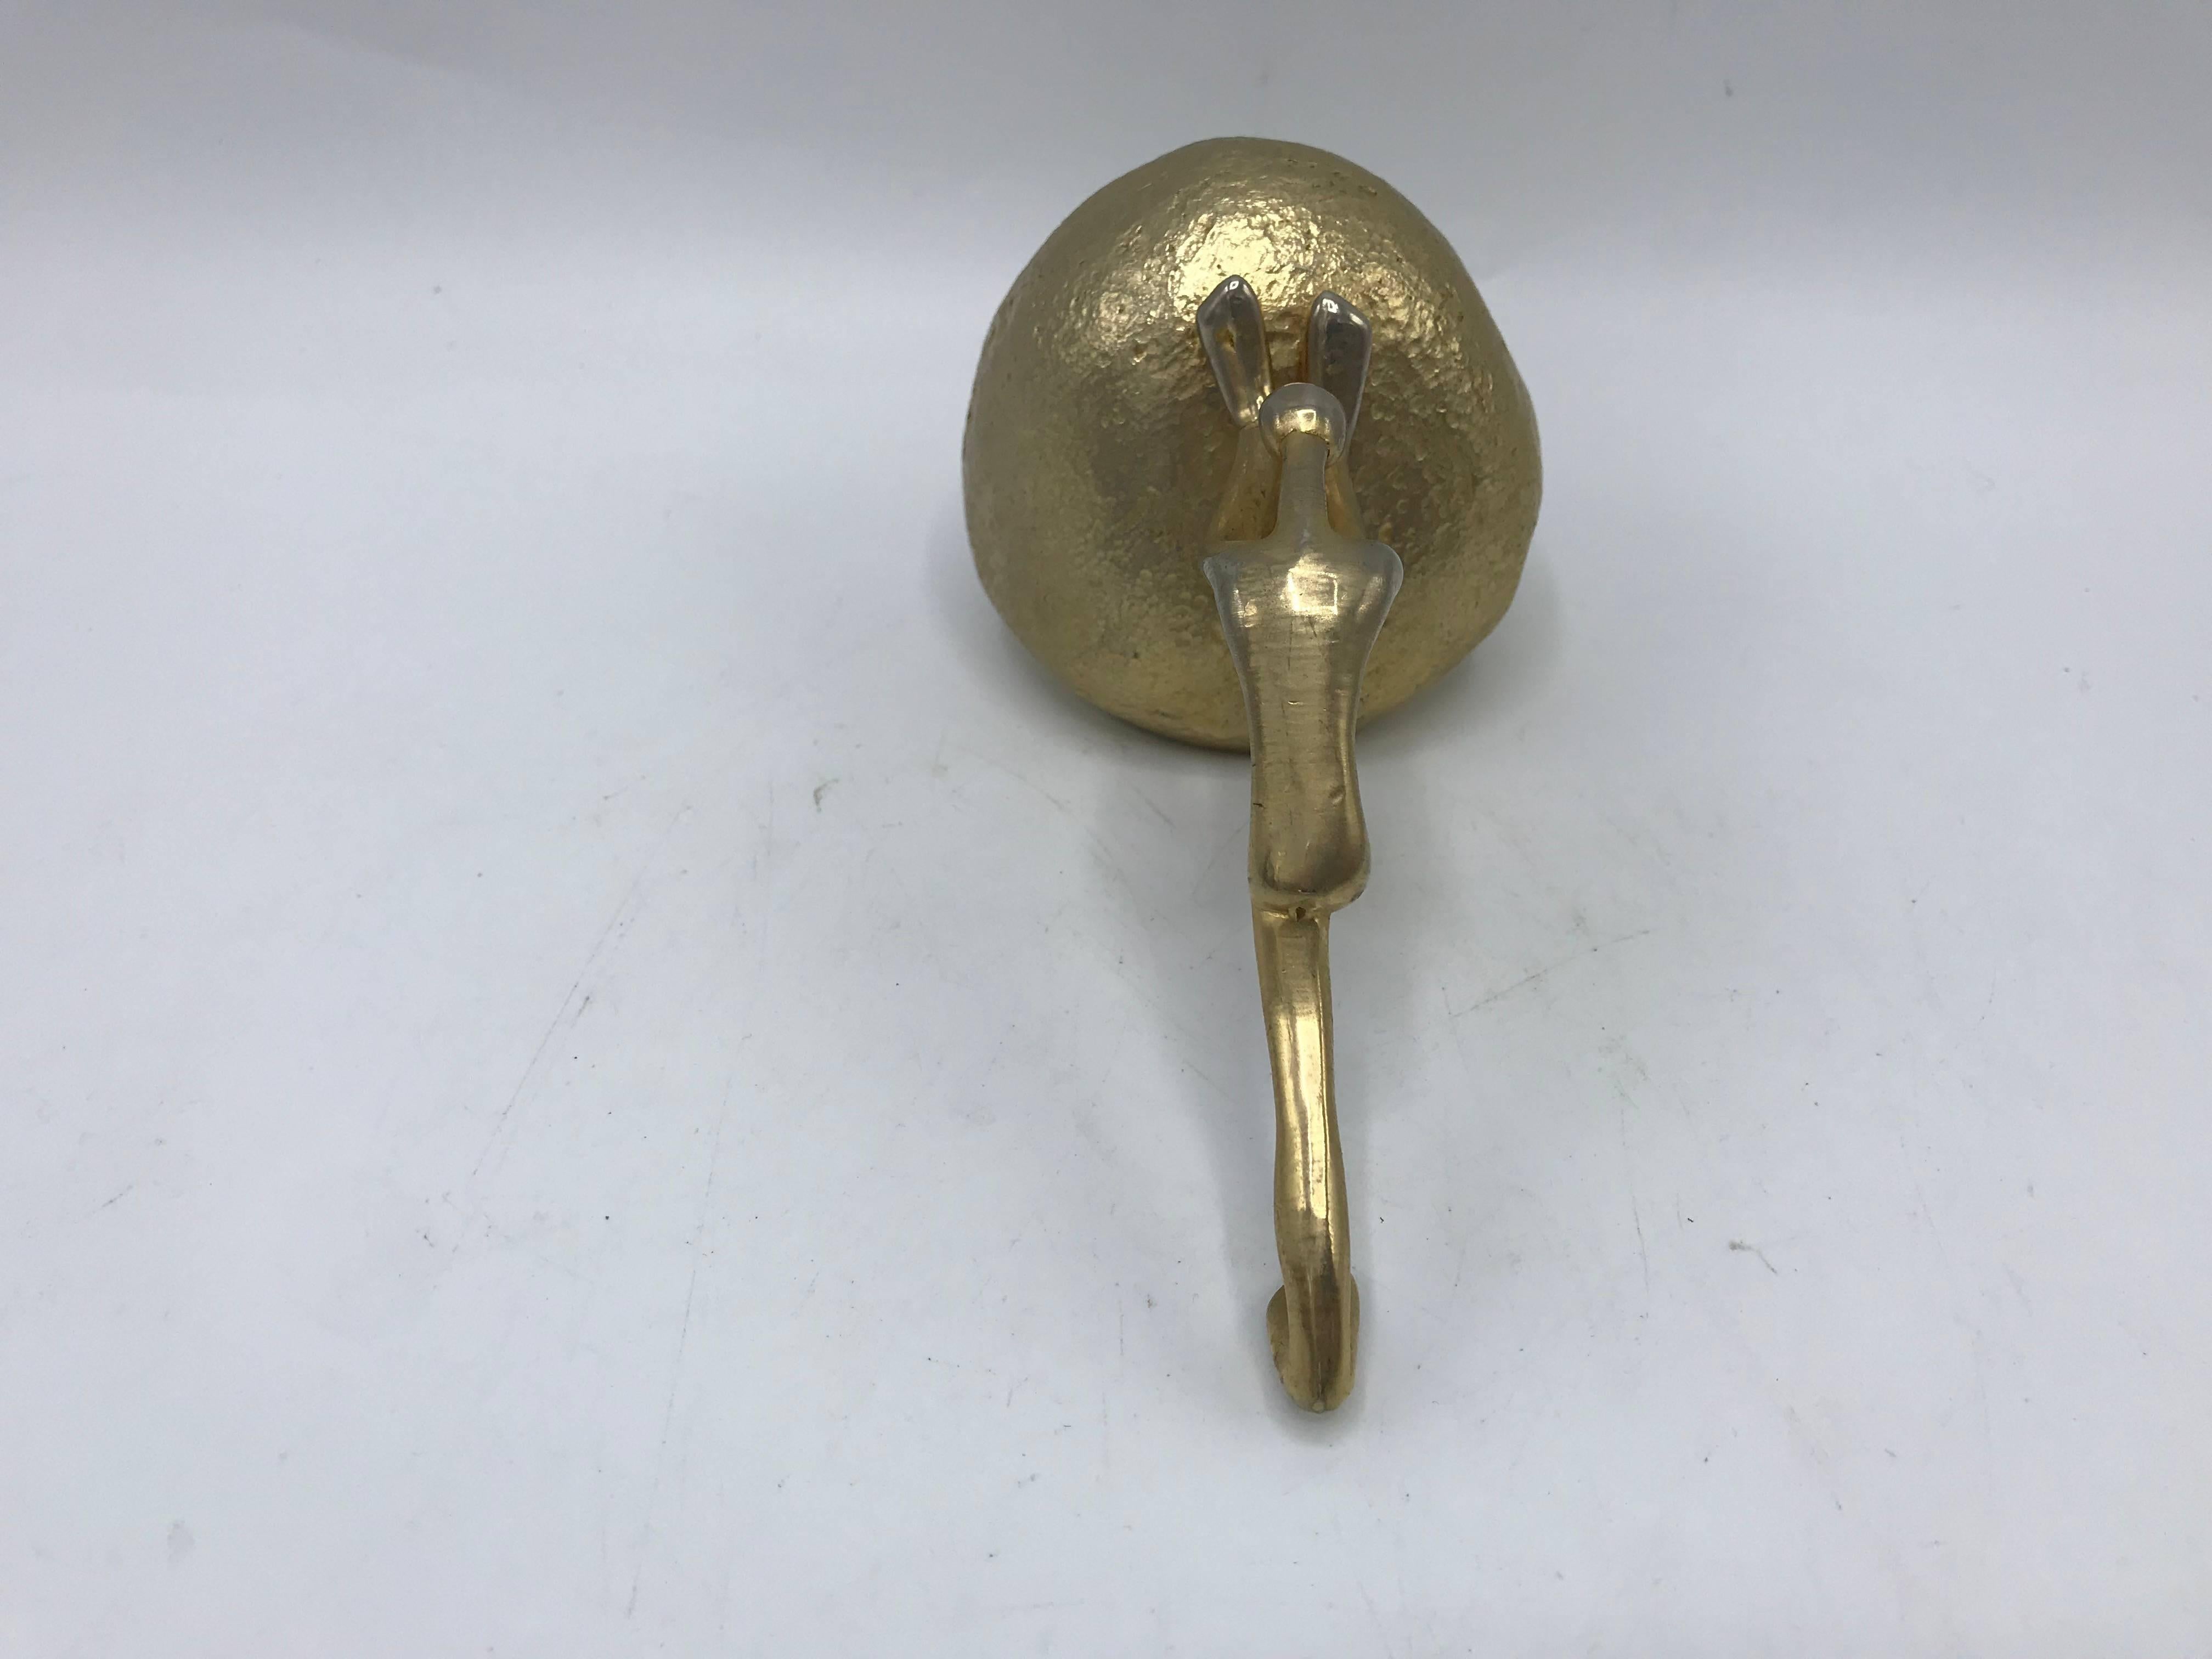 Modern 1970s Ted Arnold Gold Sisyphus Sculpture Paperweight